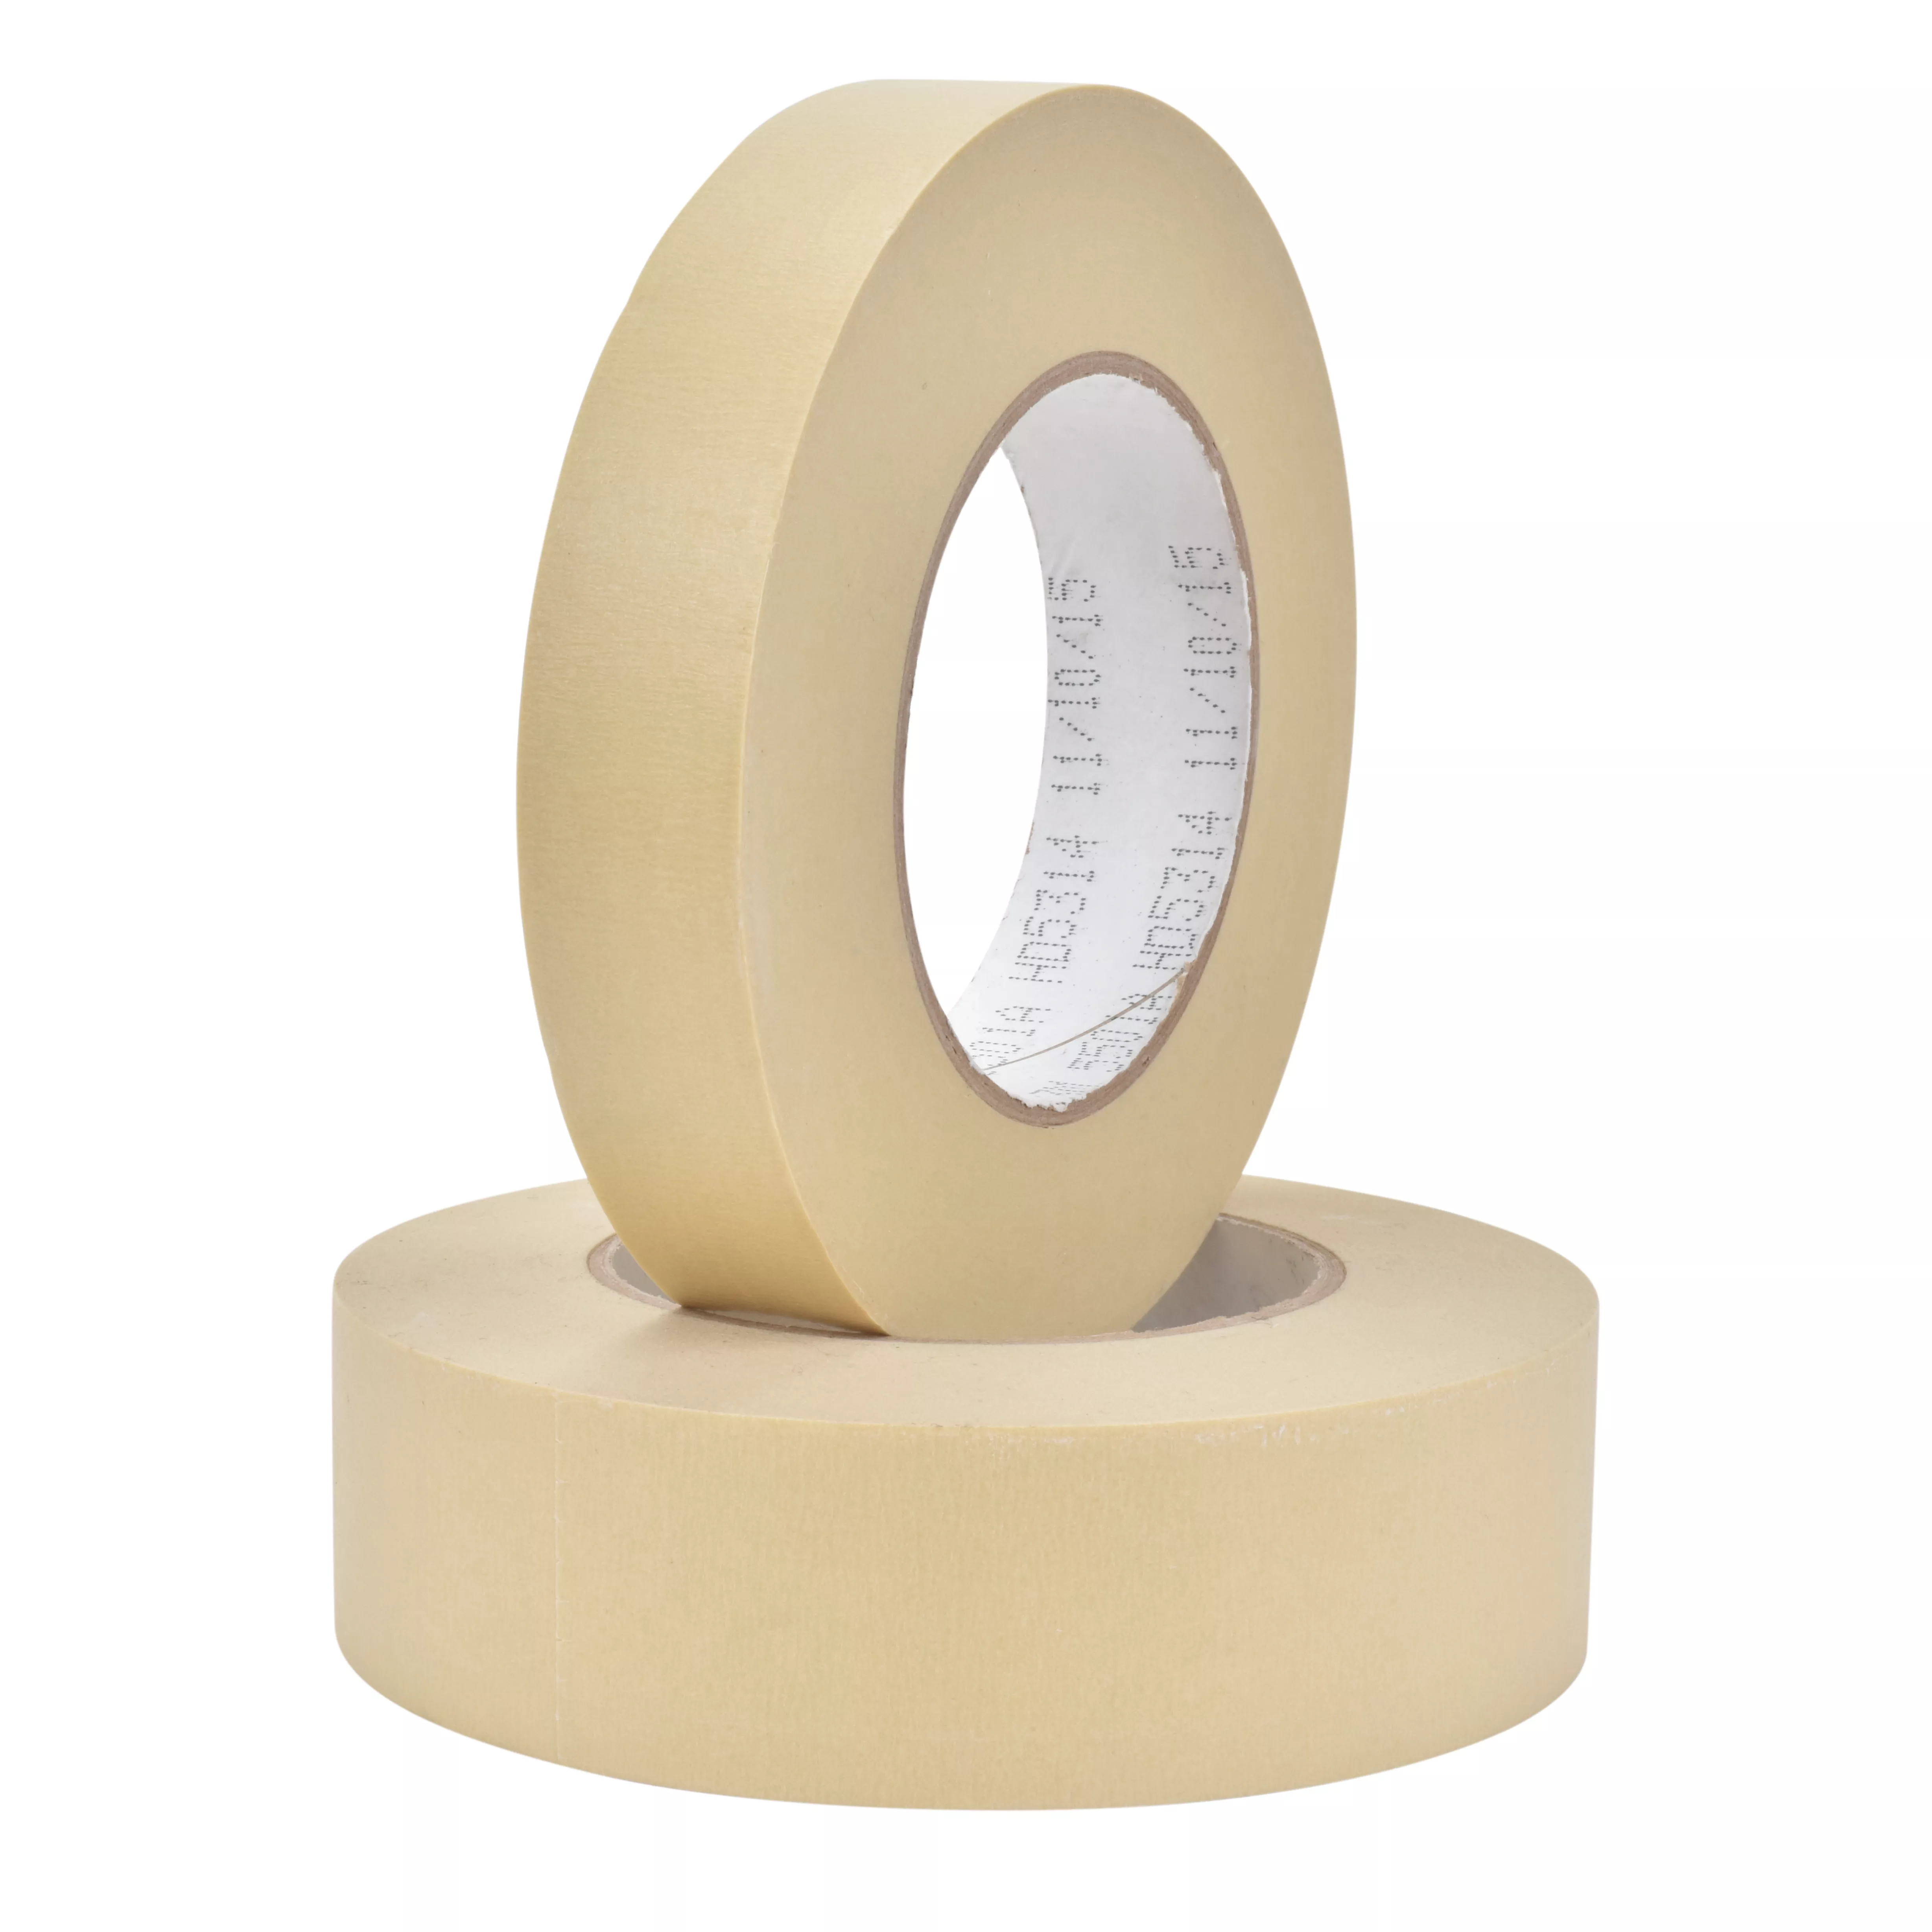 SKU 7010313256 | 3M™ Specialty High Temperature Masking Tape 5501A